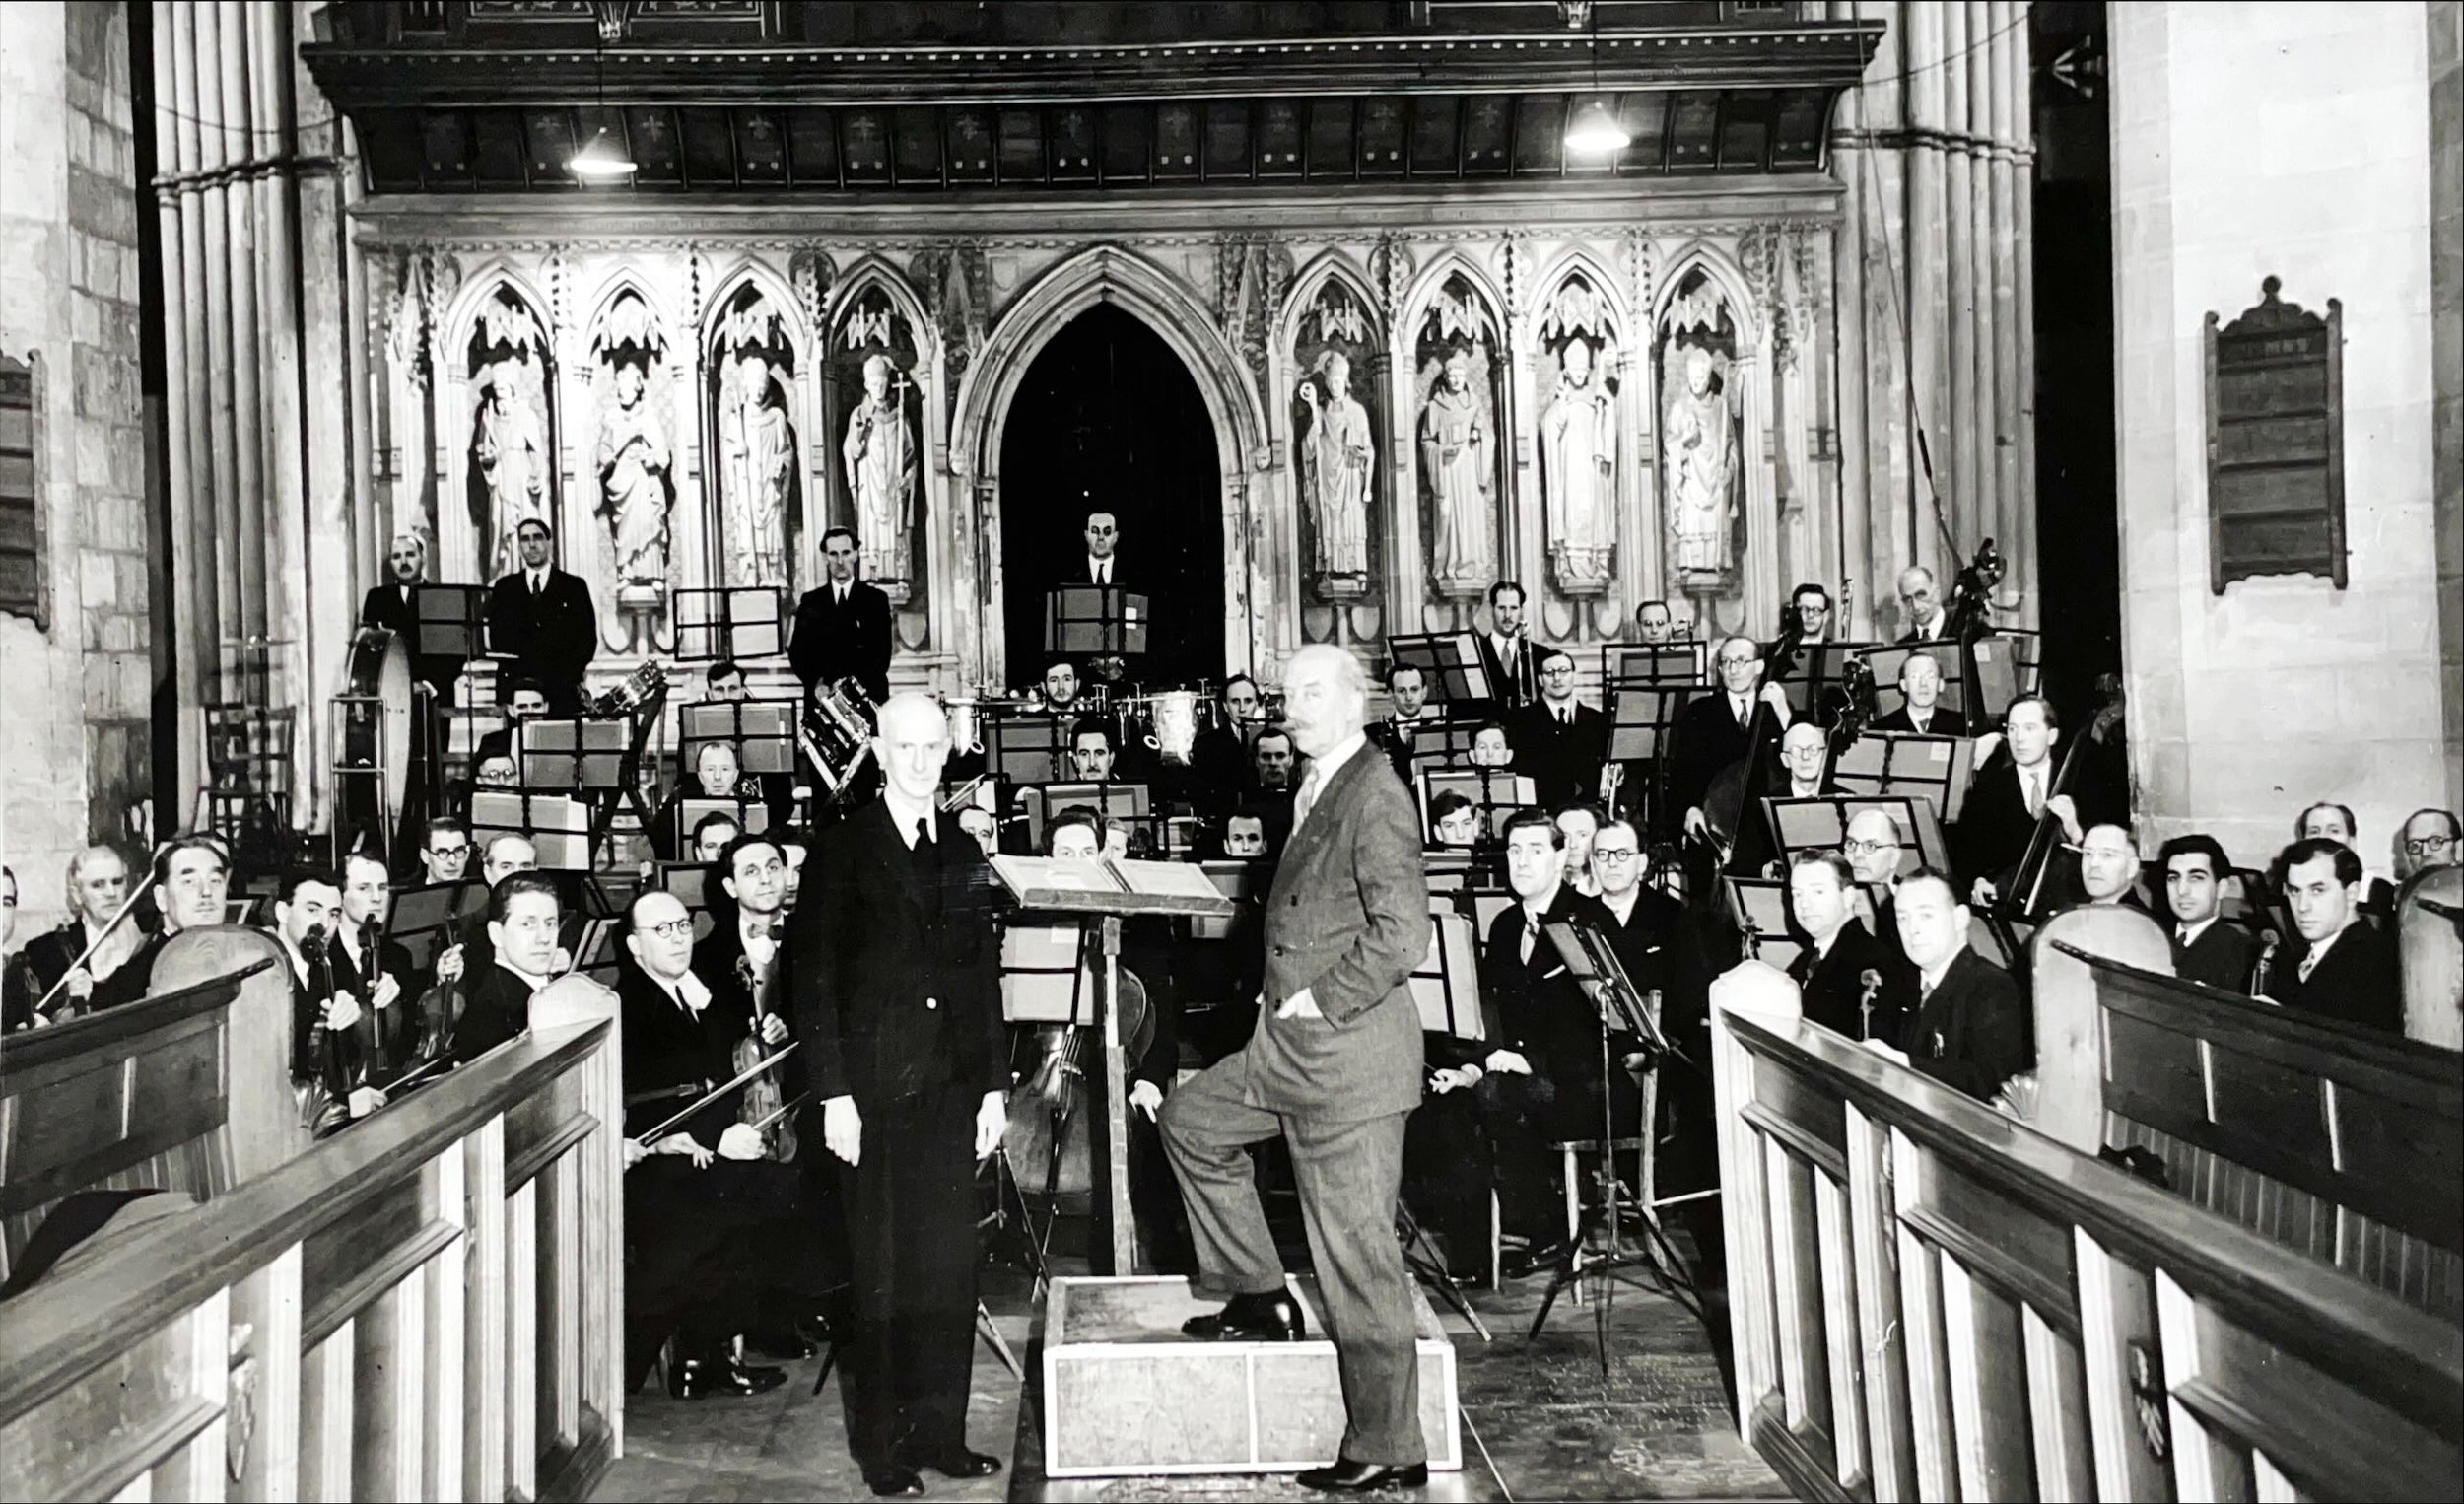 The organist Mr H. A. Bennett and Sir Adrian Boult with the London Philharmonic Orchestra, February 1951